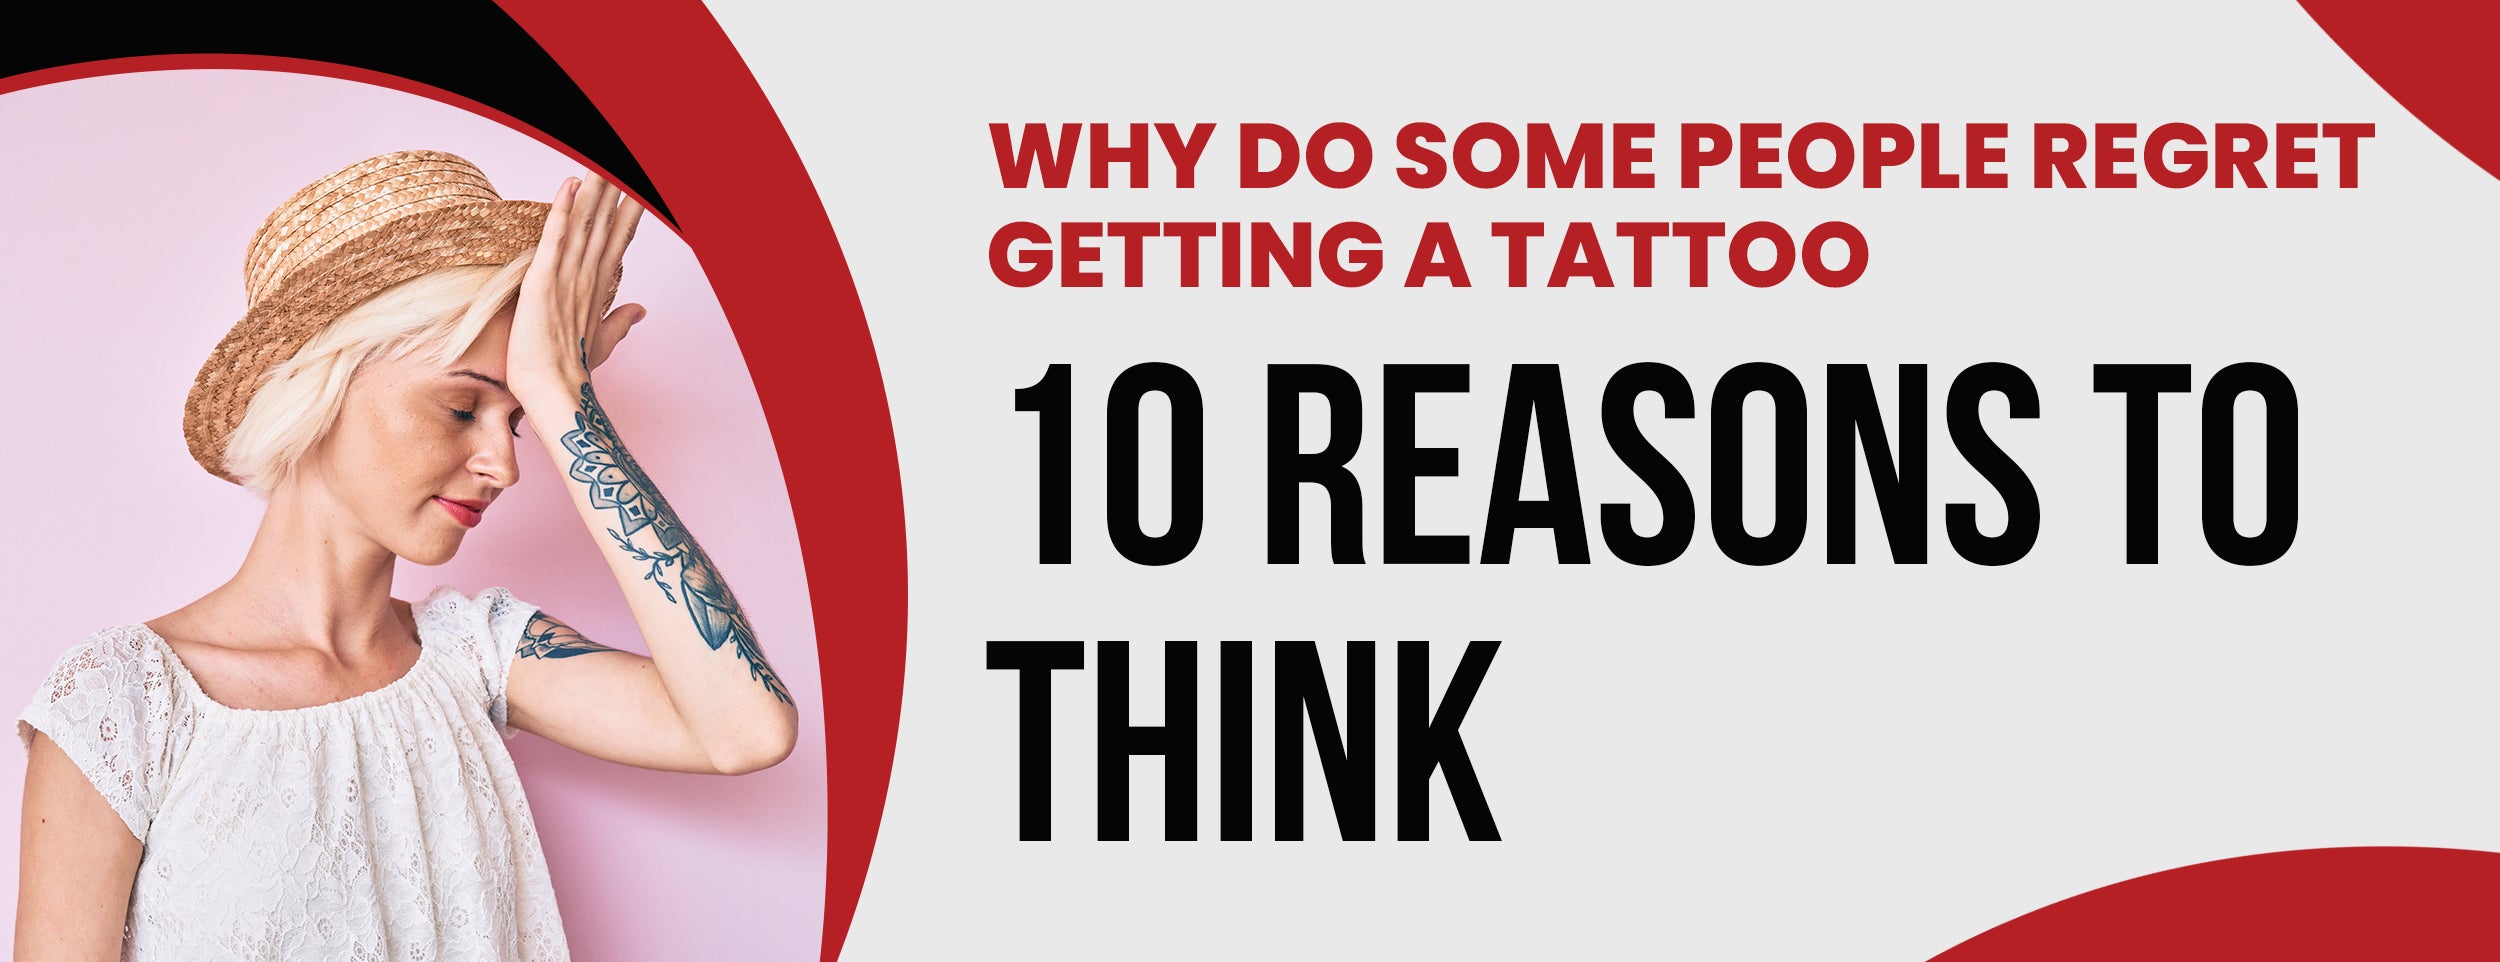  Reasons why people regret getting tattoos & major impacts